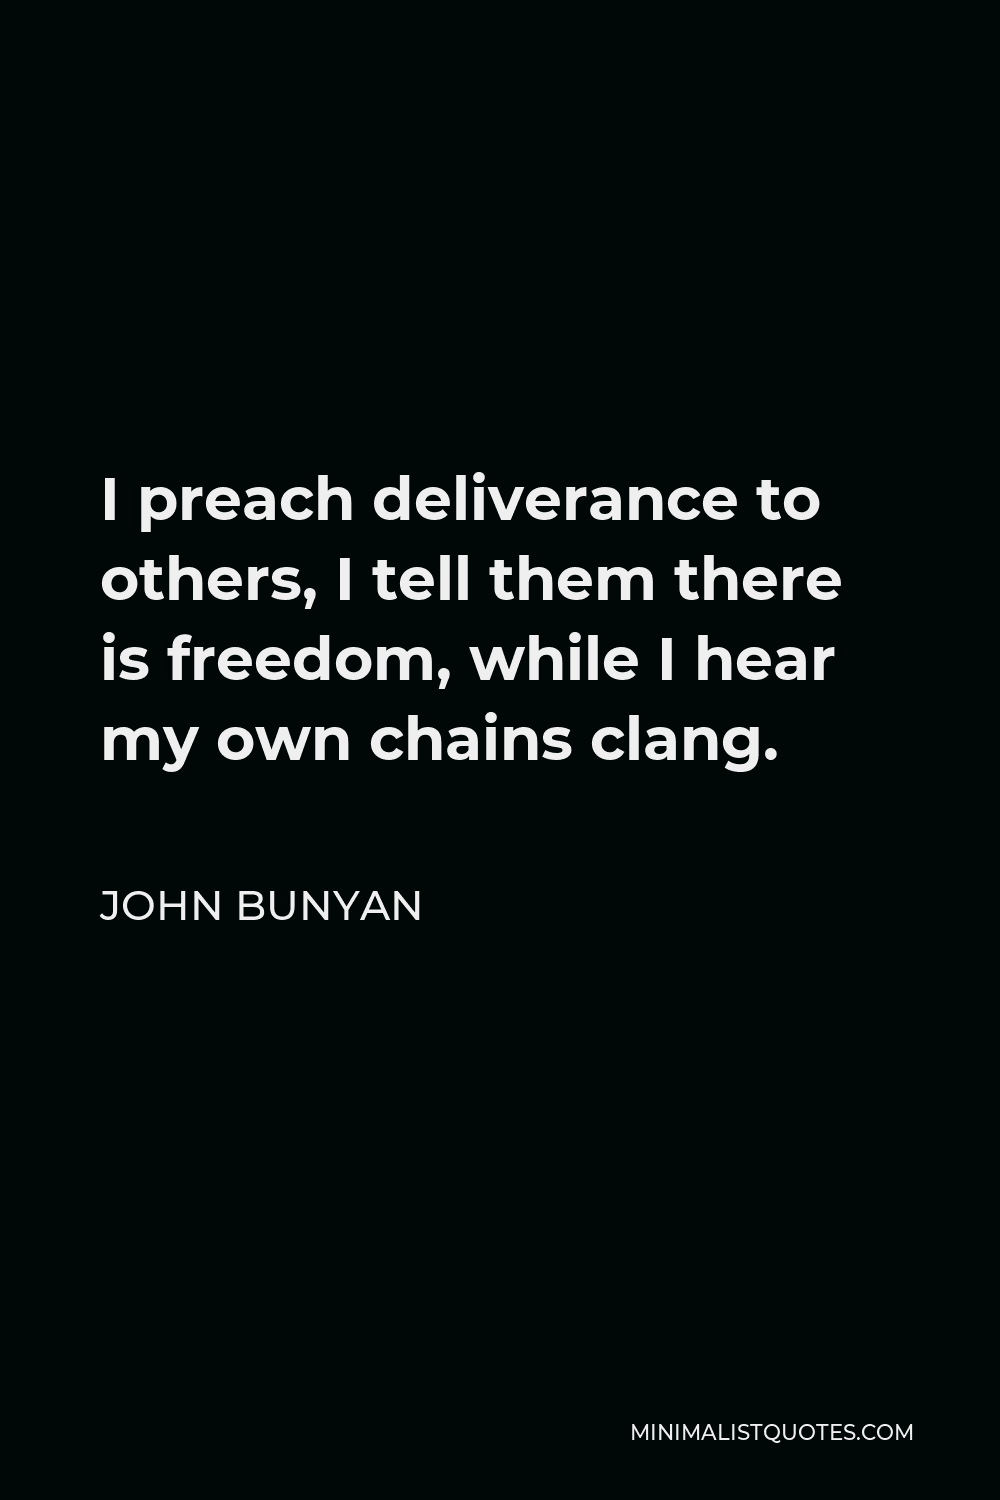 John Bunyan Quote - I preach deliverance to others, I tell them there is freedom, while I hear my own chains clang.